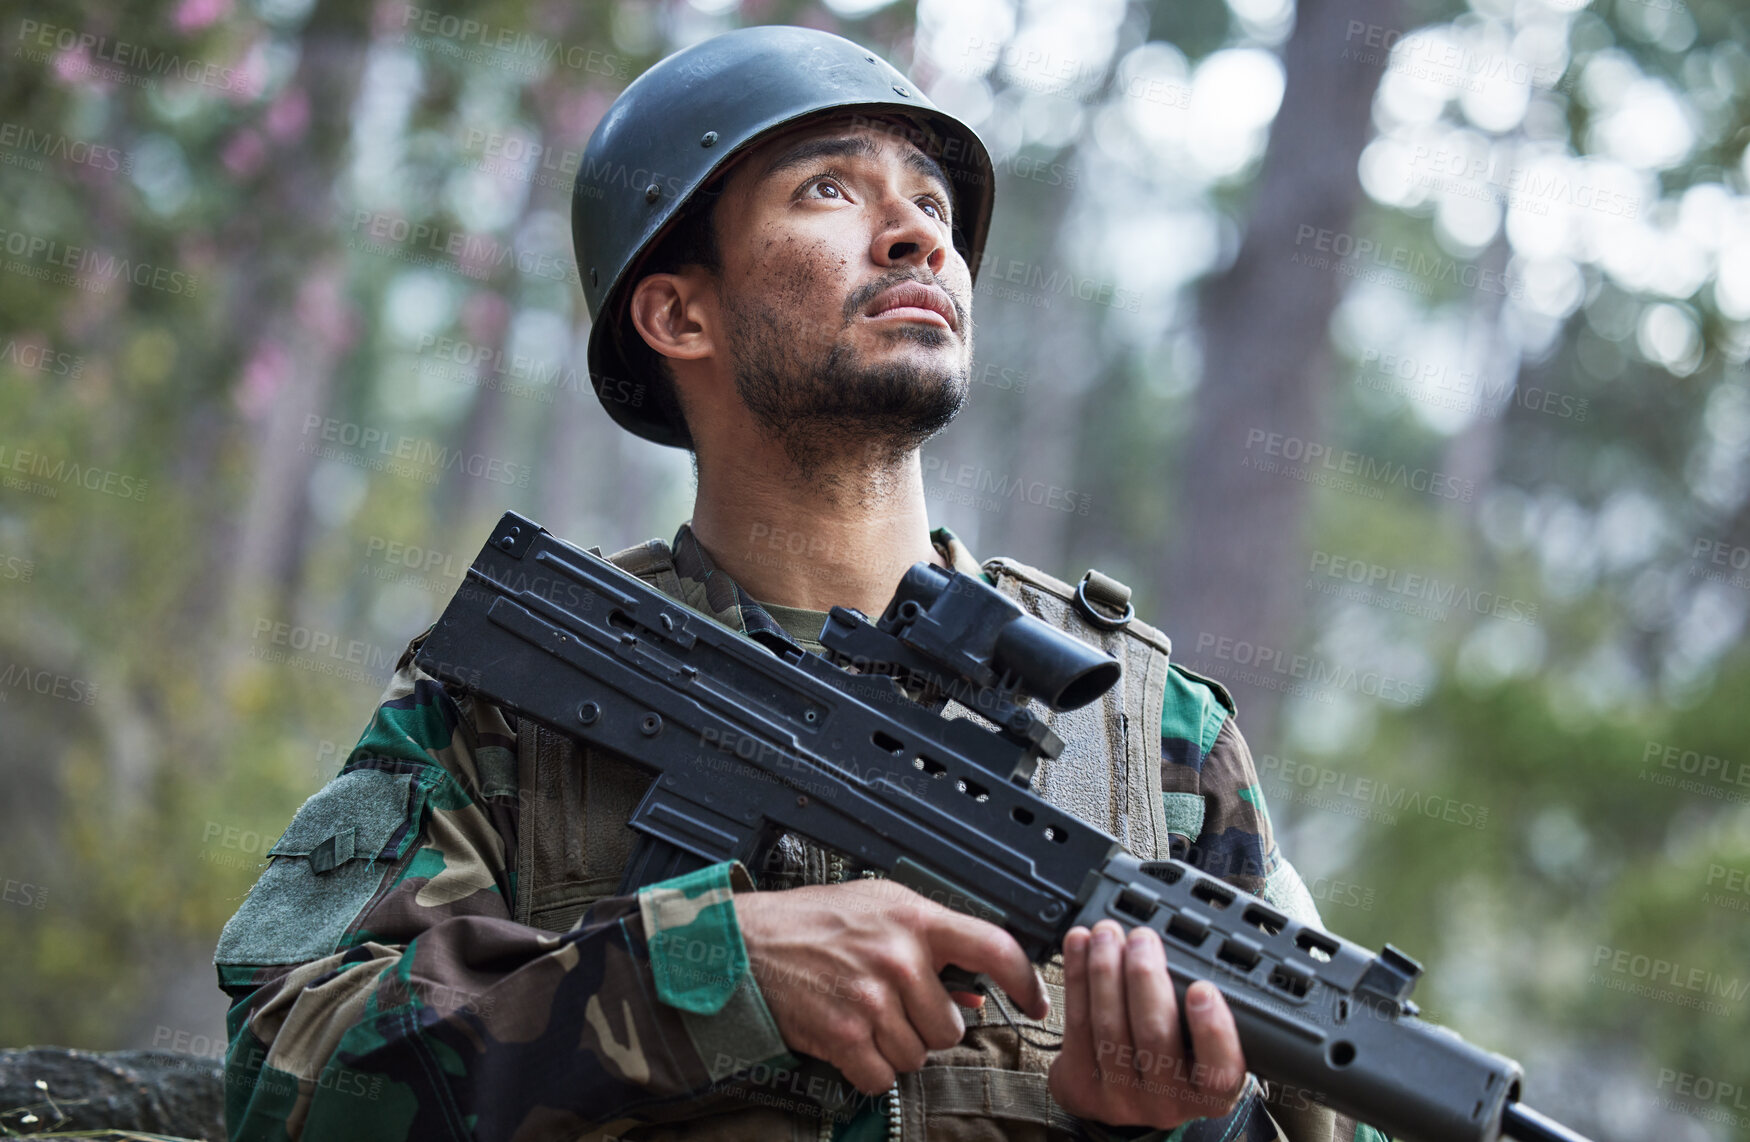 Buy stock photo Soldier, army and man thinking with gun in forest training, outdoor shooting or military exercise, mission and focus. Rifle, veteran and young person search woods or nature in battlefield gear vision